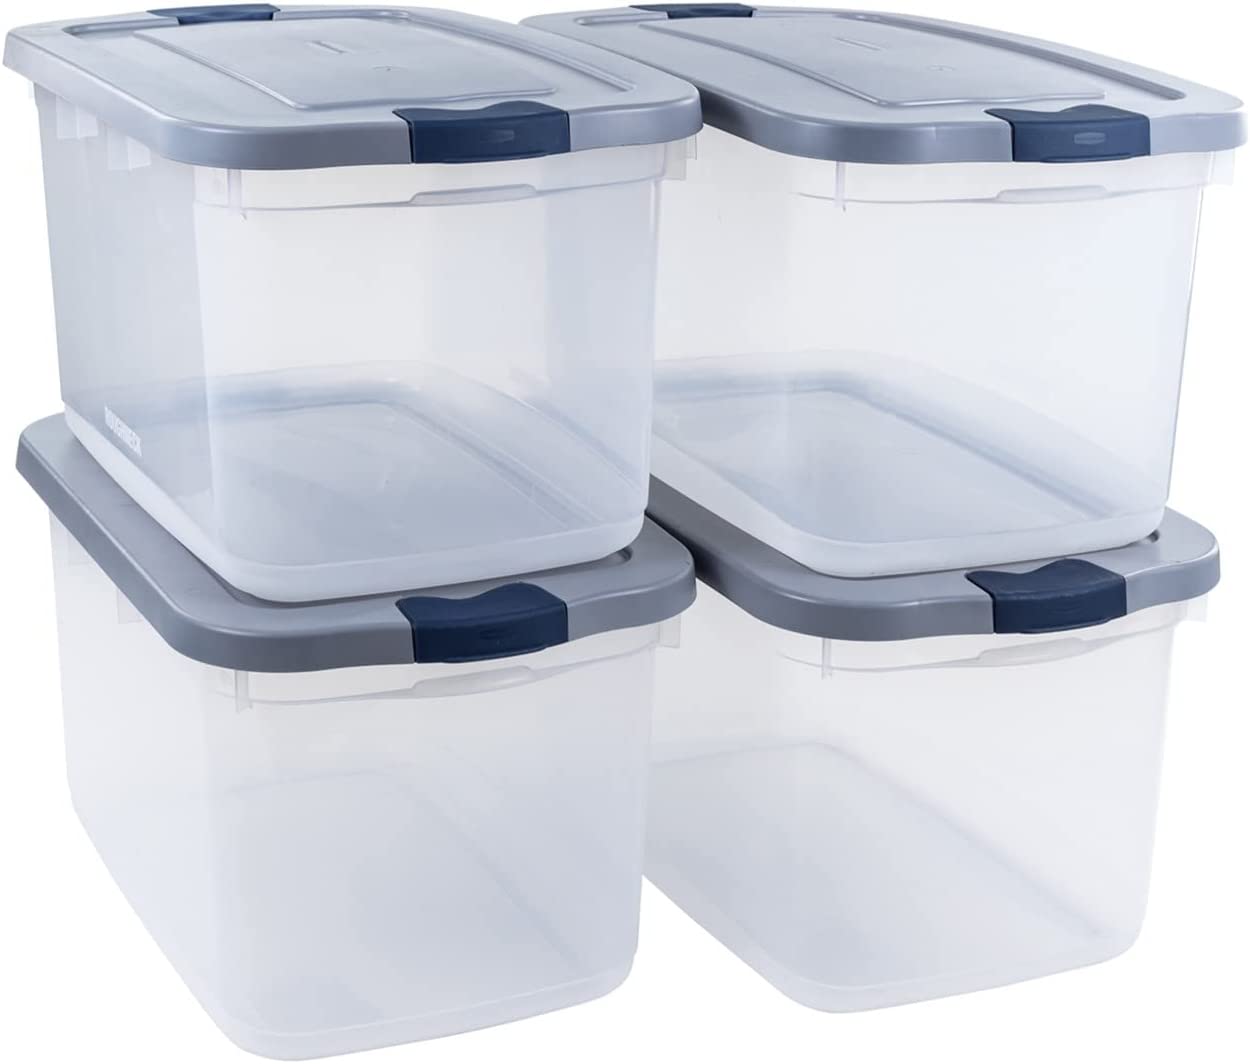 SE Clear Round Plastic Storage Containers with Screw-On Lids (Set of 12) -  87440BB